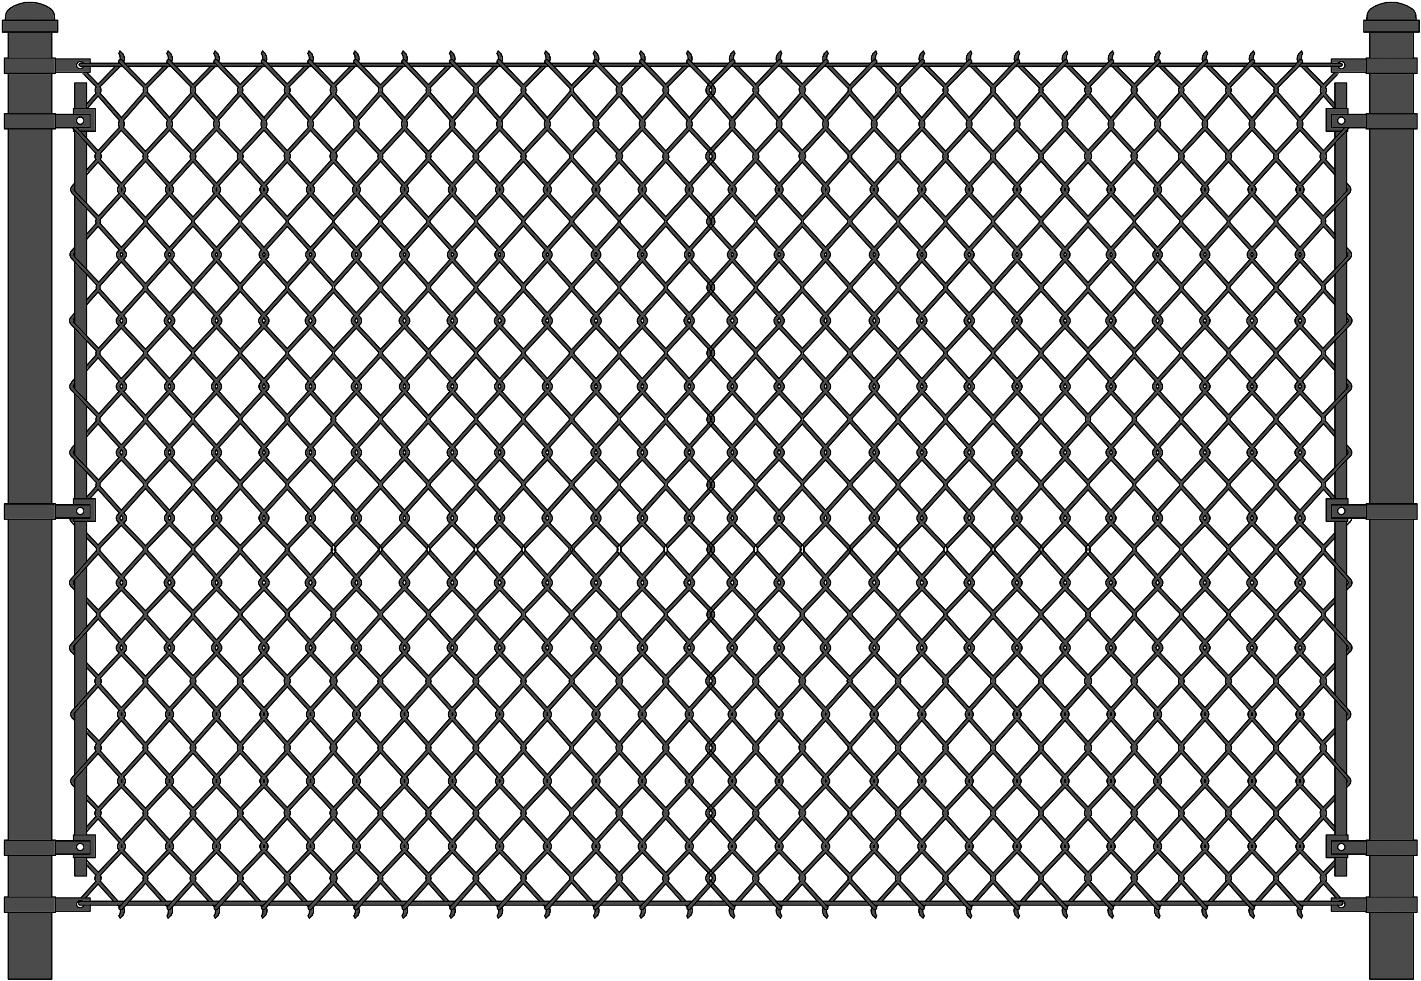 Chain Link Fence | Fence Geeks | Wrought Iron Fences, Gates, and Access